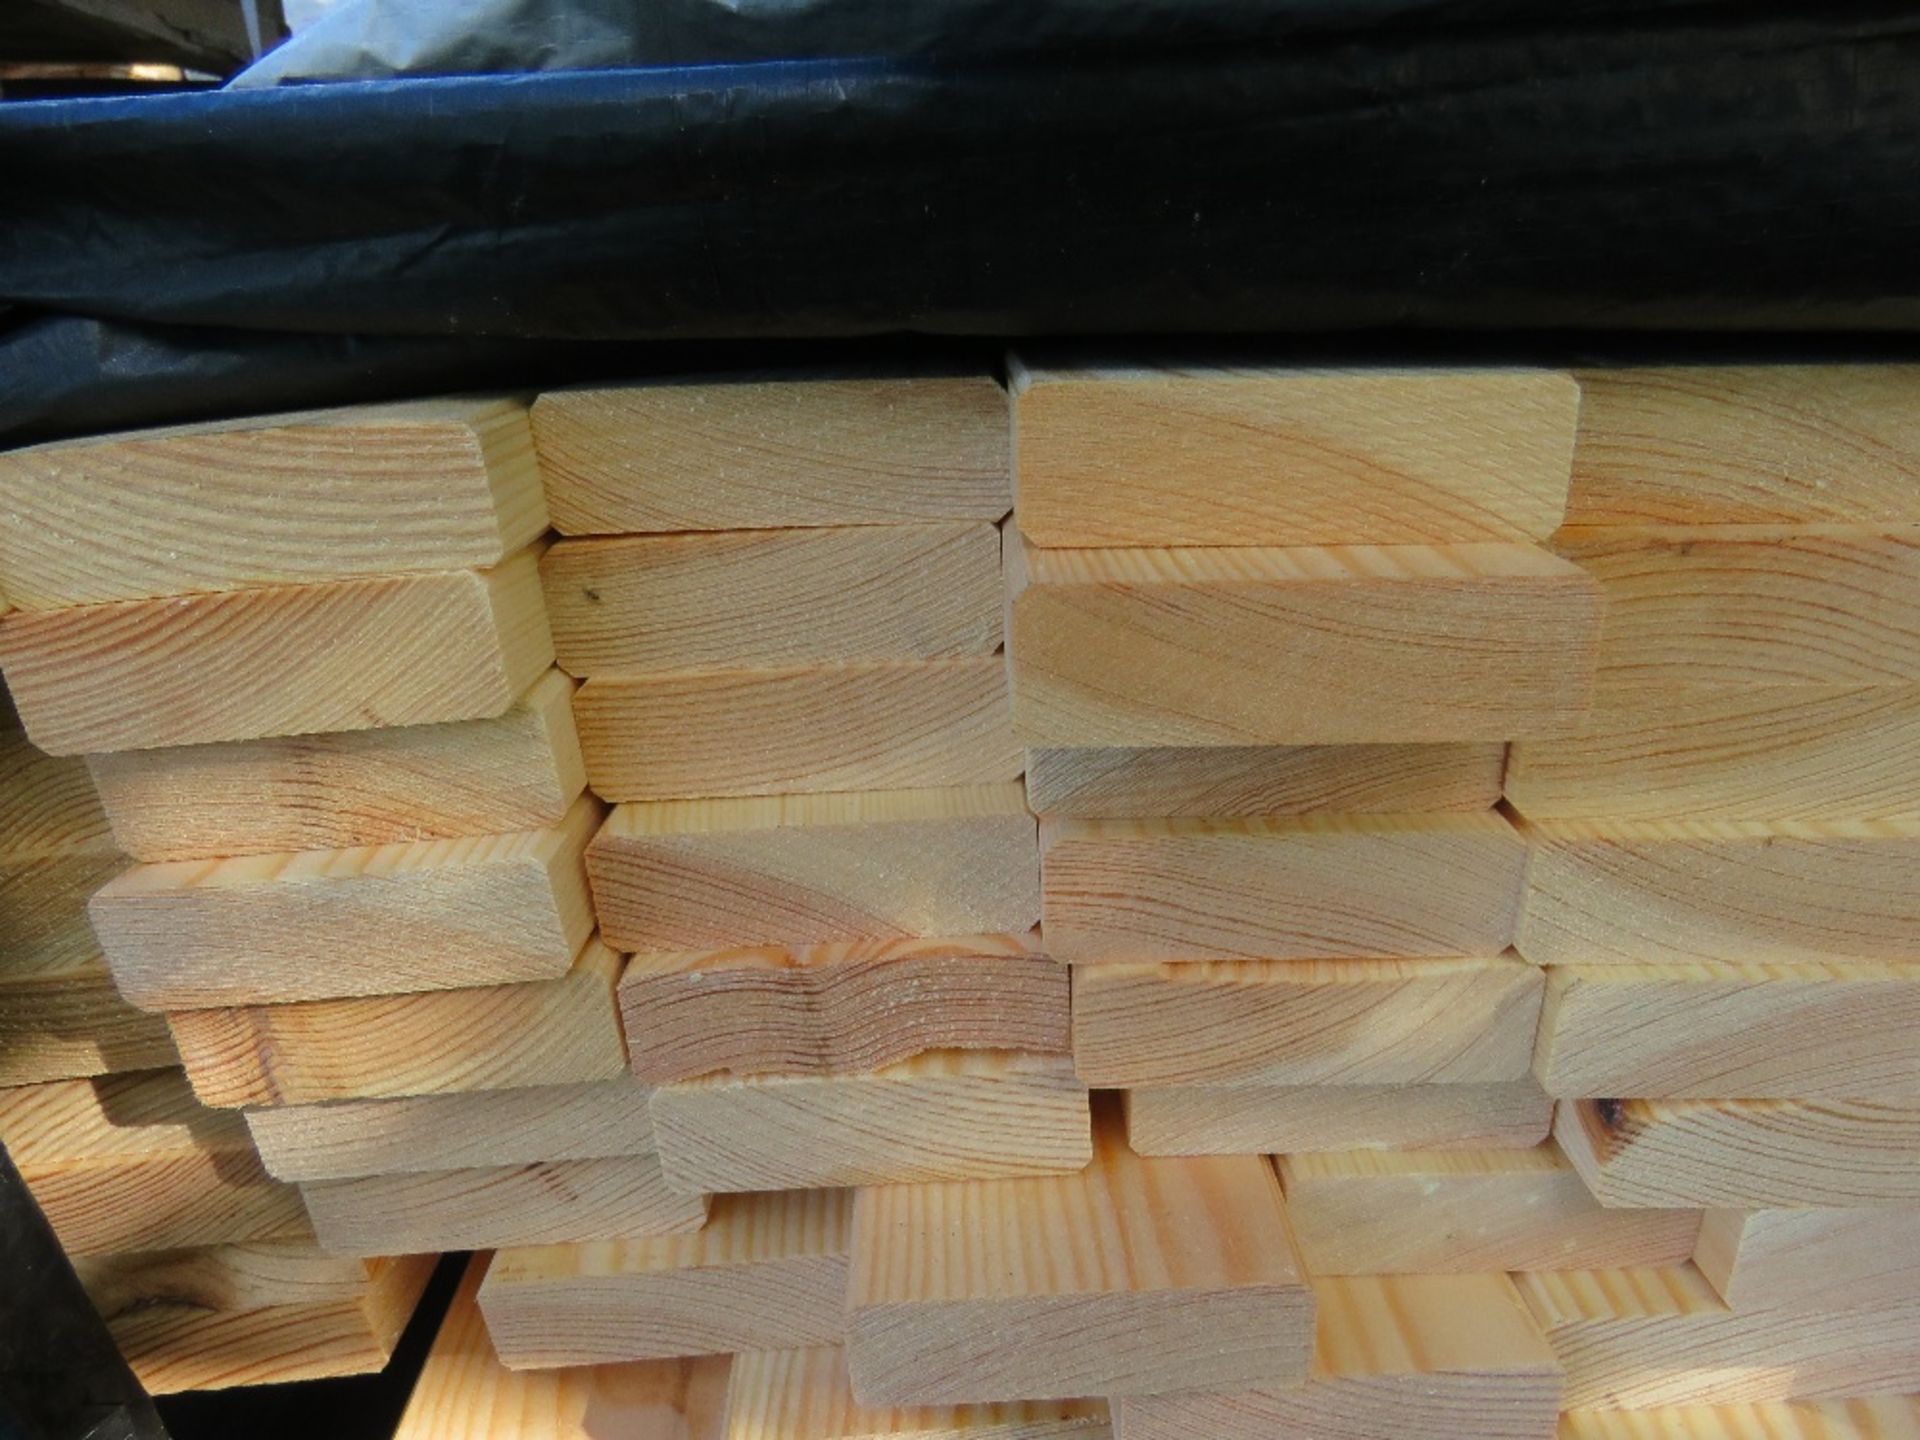 EXTRA LARGE PACK OF TIMBER BOARDS, UNTREATED. SIZE: 1.83M LENGTH X 70MM WIDE X 20MM DEPTH APPROX. - Image 3 of 4